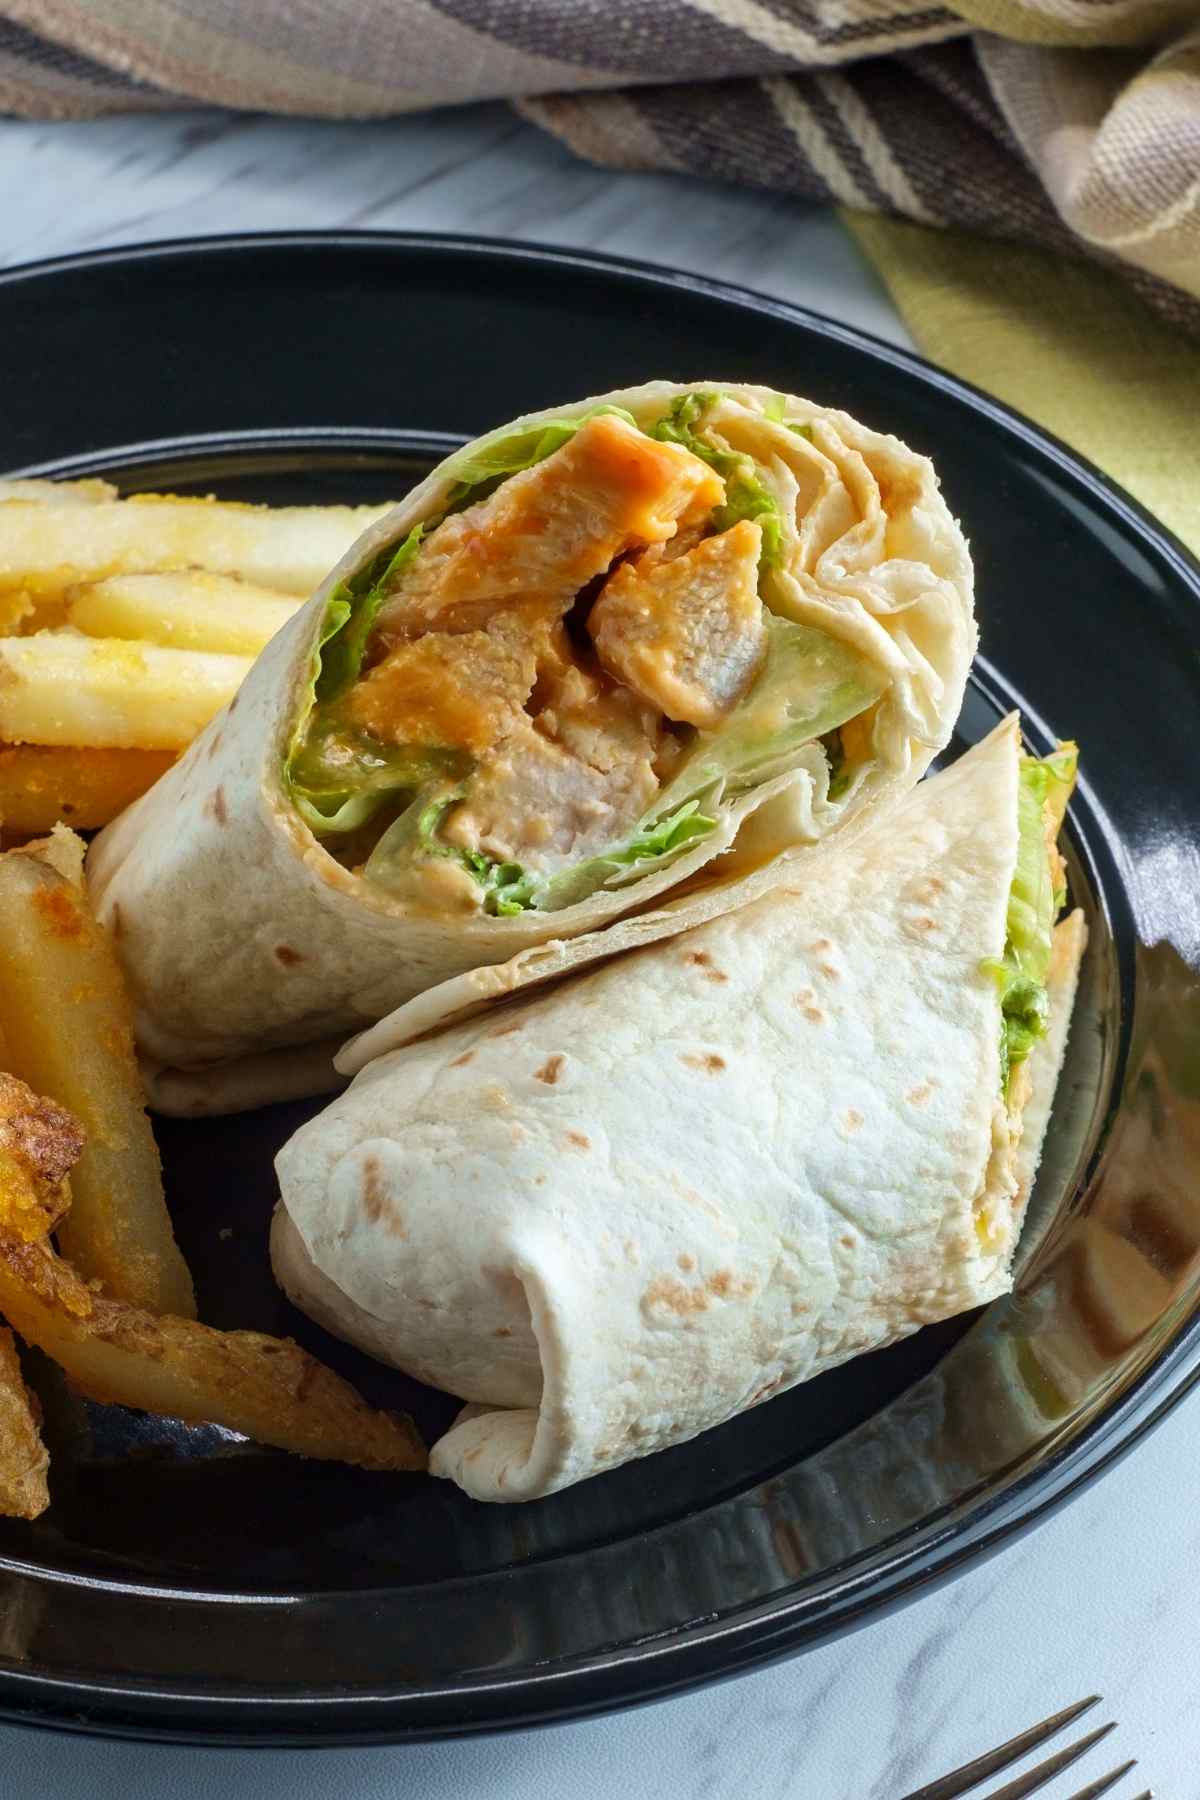 This copycat of McDonald’s grilled chicken snack wrap is perfect for a satisfying lunch. The chicken is seasoned with paprika, garlic powder, oregano, and cumin, and the wrap is drizzled with store-bought ranch dressing to save time.